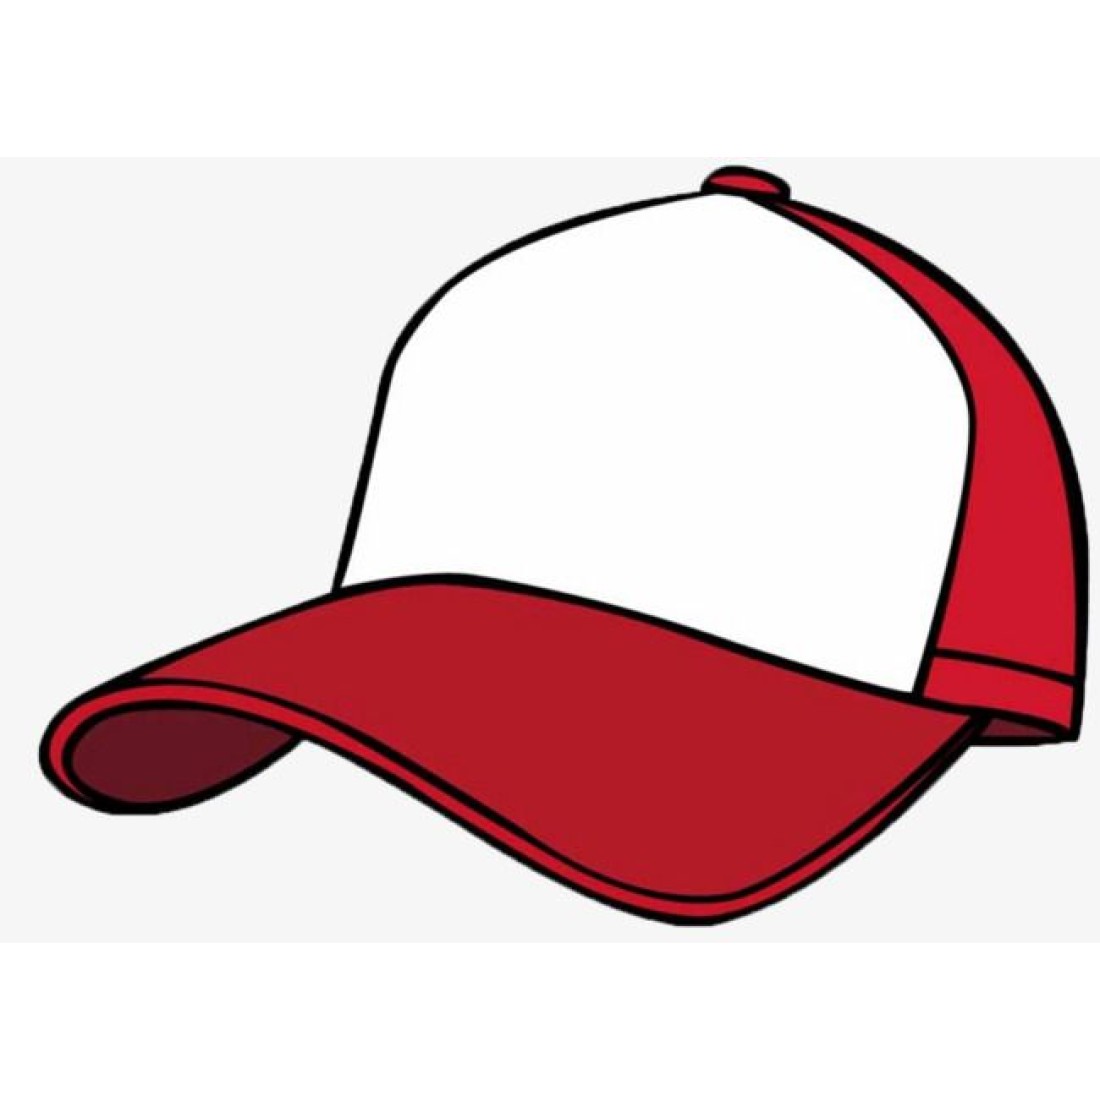 Picture of a baseball cap